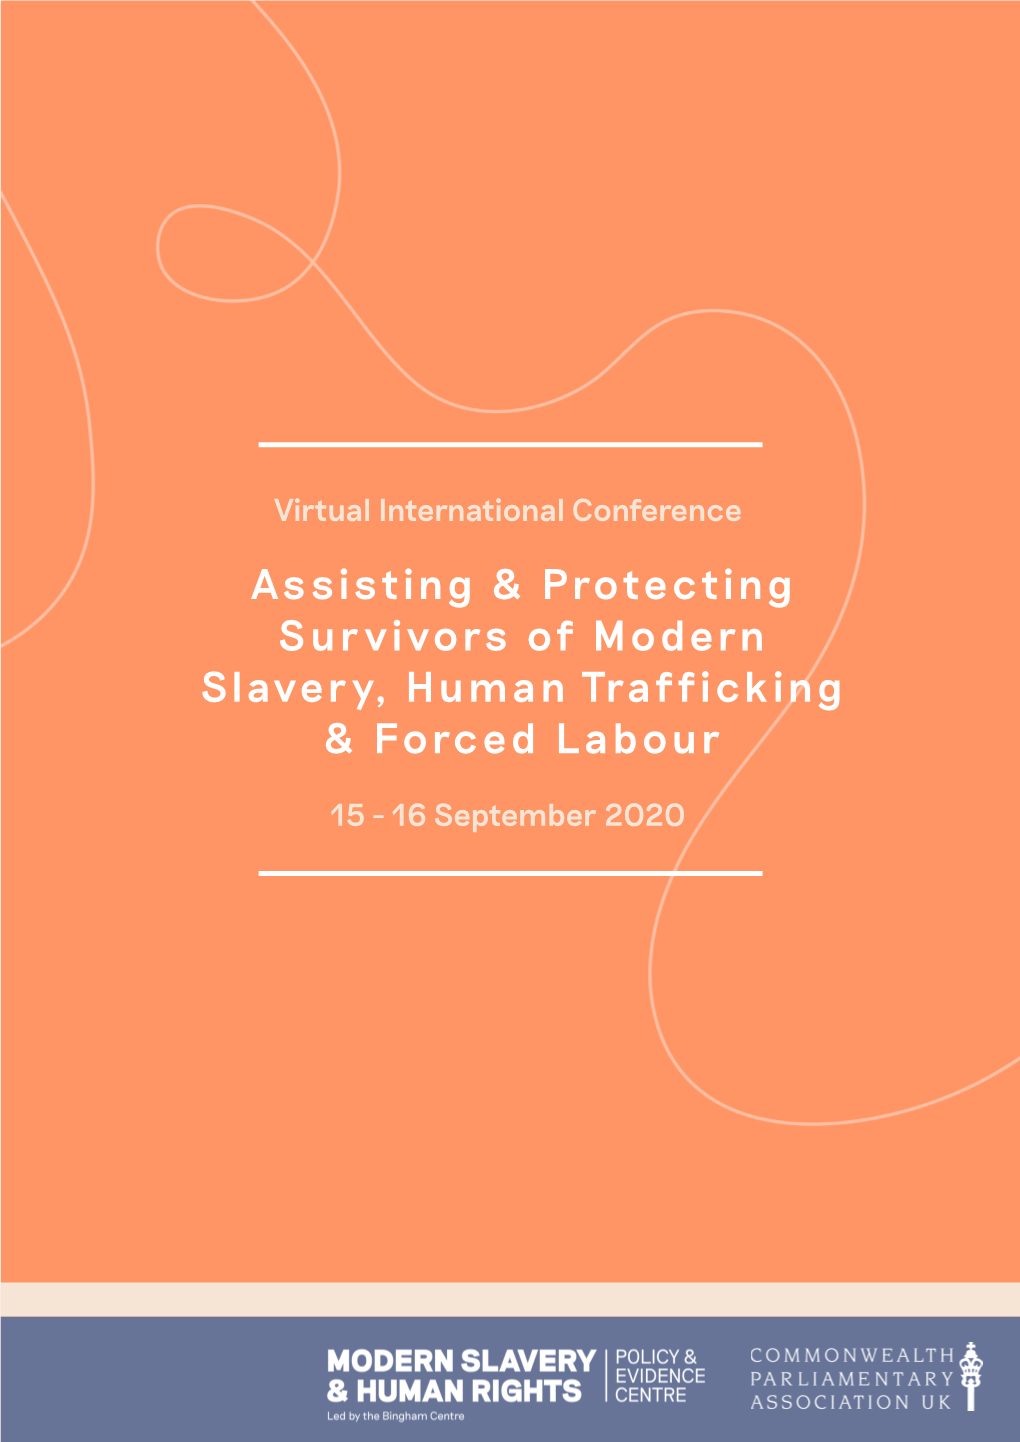 Assisting & Protecting Survivors of Modern Slavery, Human Trafficking